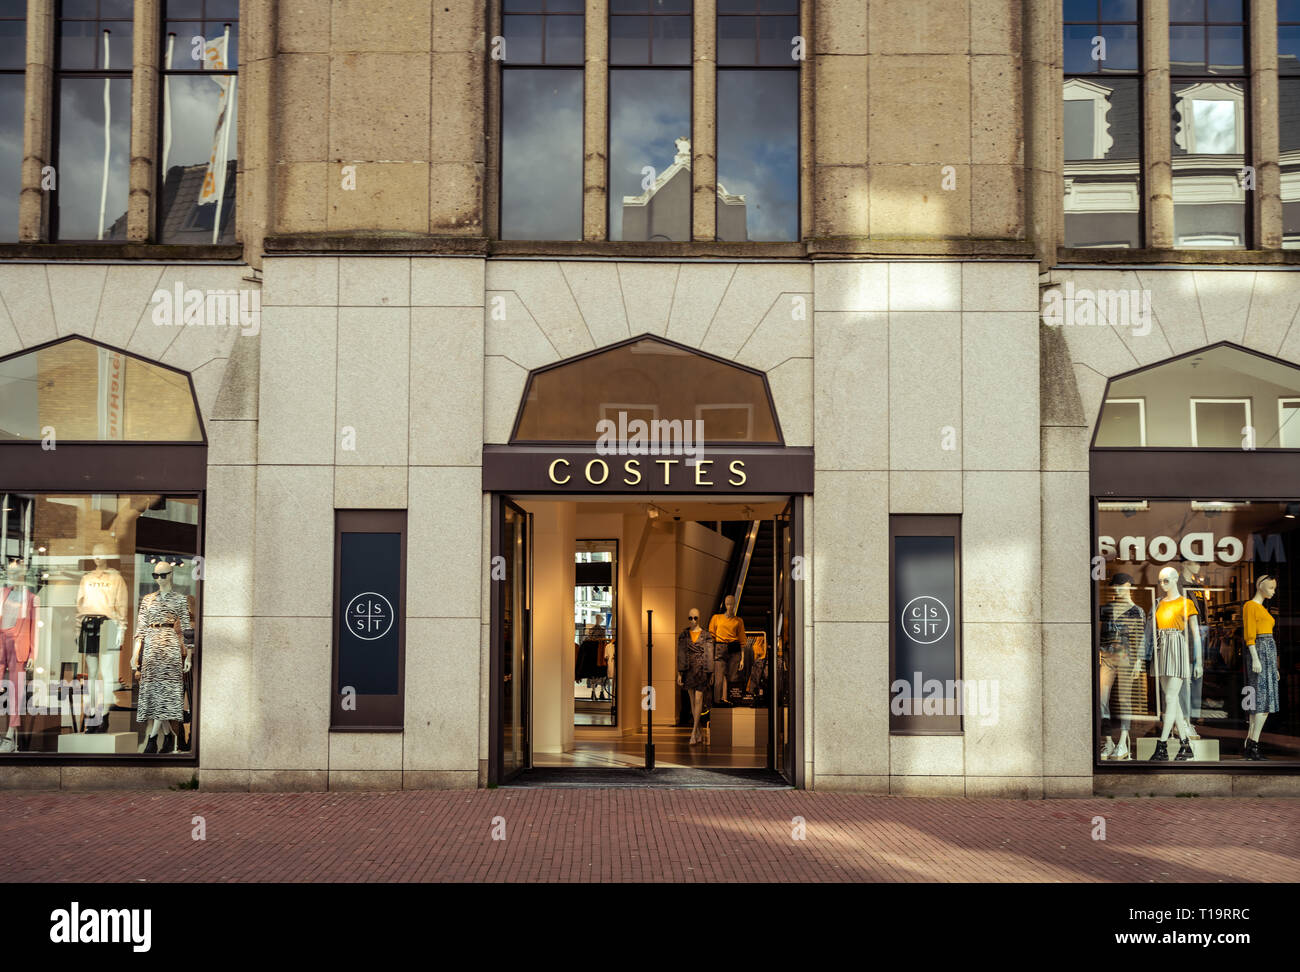 Dordrecht, Netherlands - March 03, 2019: Costes logo on a storefront. Costes, part of The Sting Companies, is originally a Dutch chain of clothing sto Stock Photo